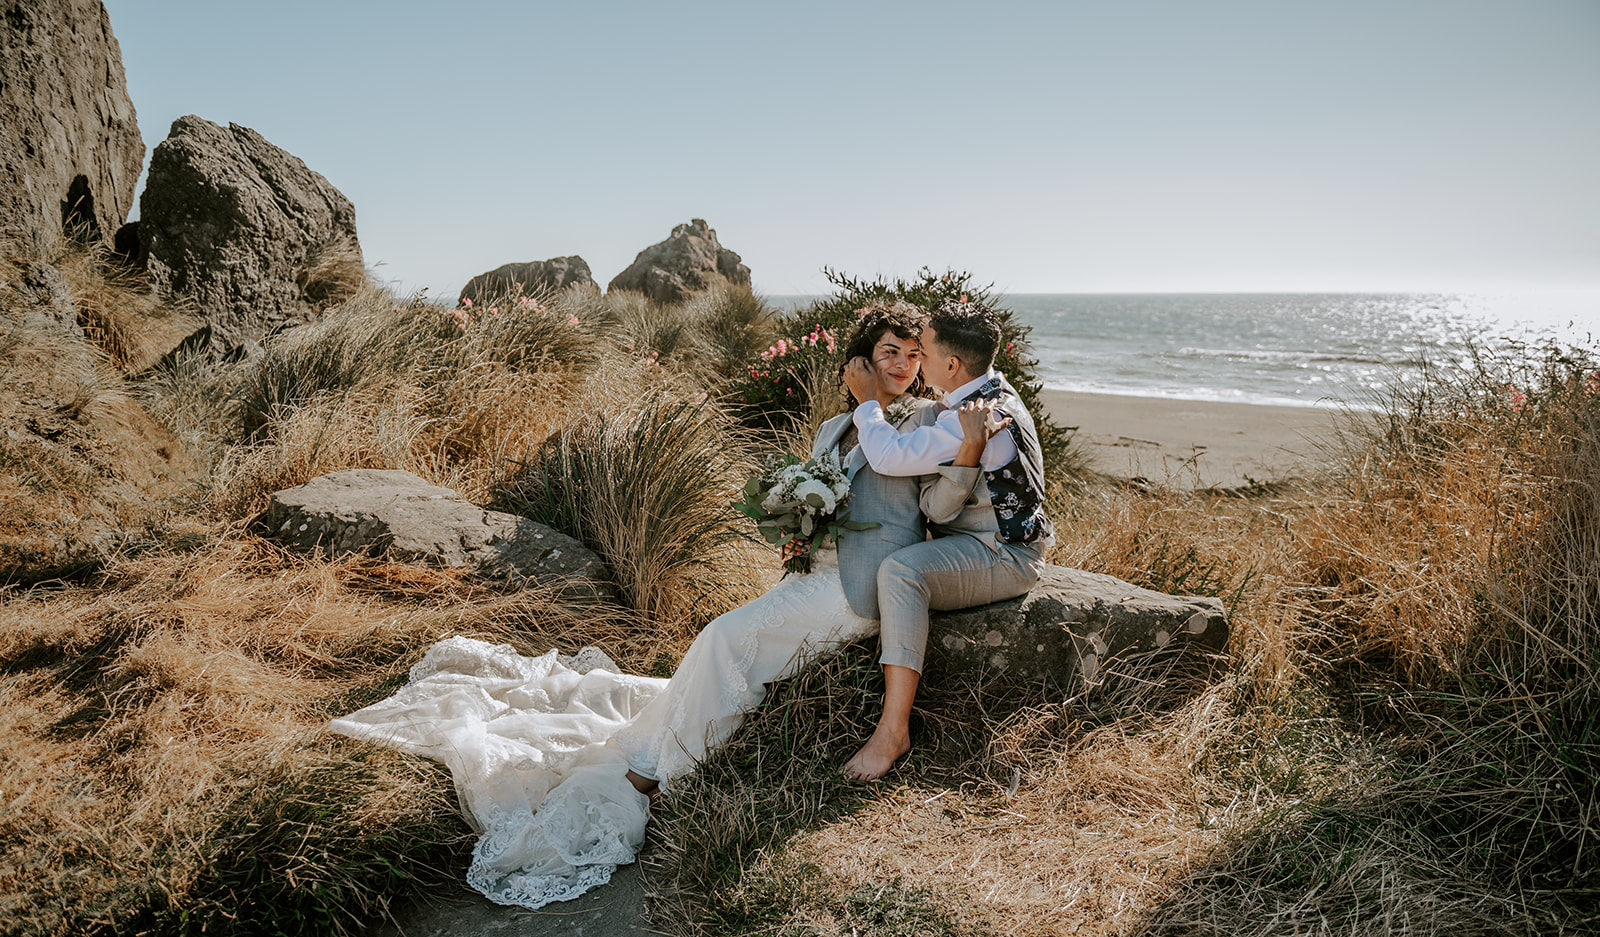 Two brides embracing at kissing rock on the Oregon coast With the beach in the background